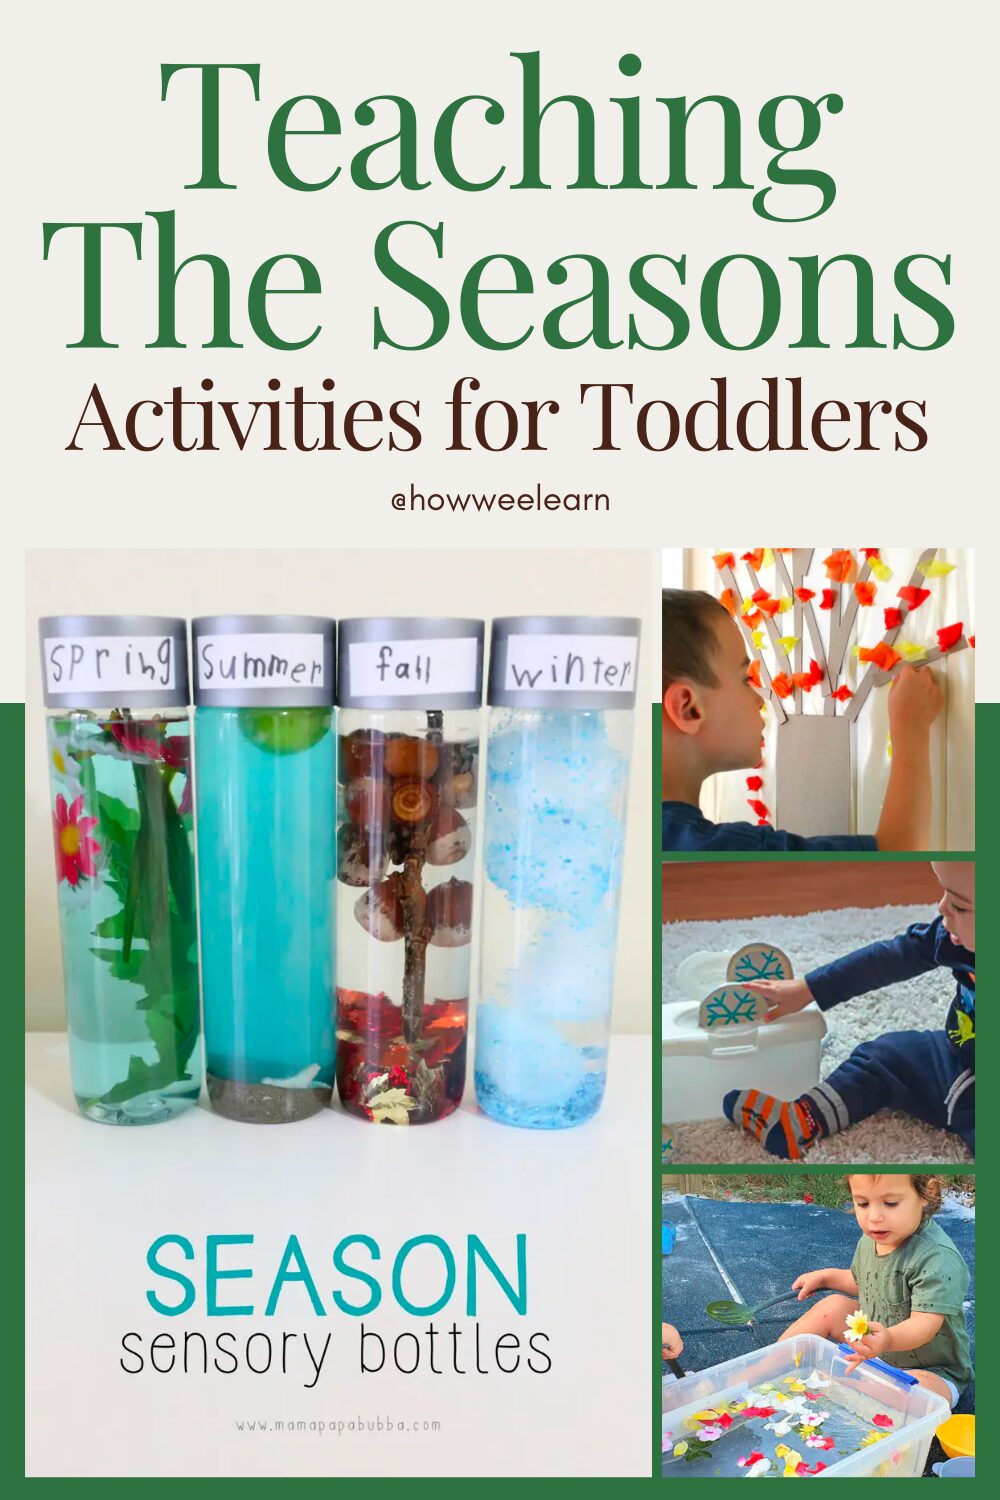 Teaching the Seasons: Activities for Toddlers